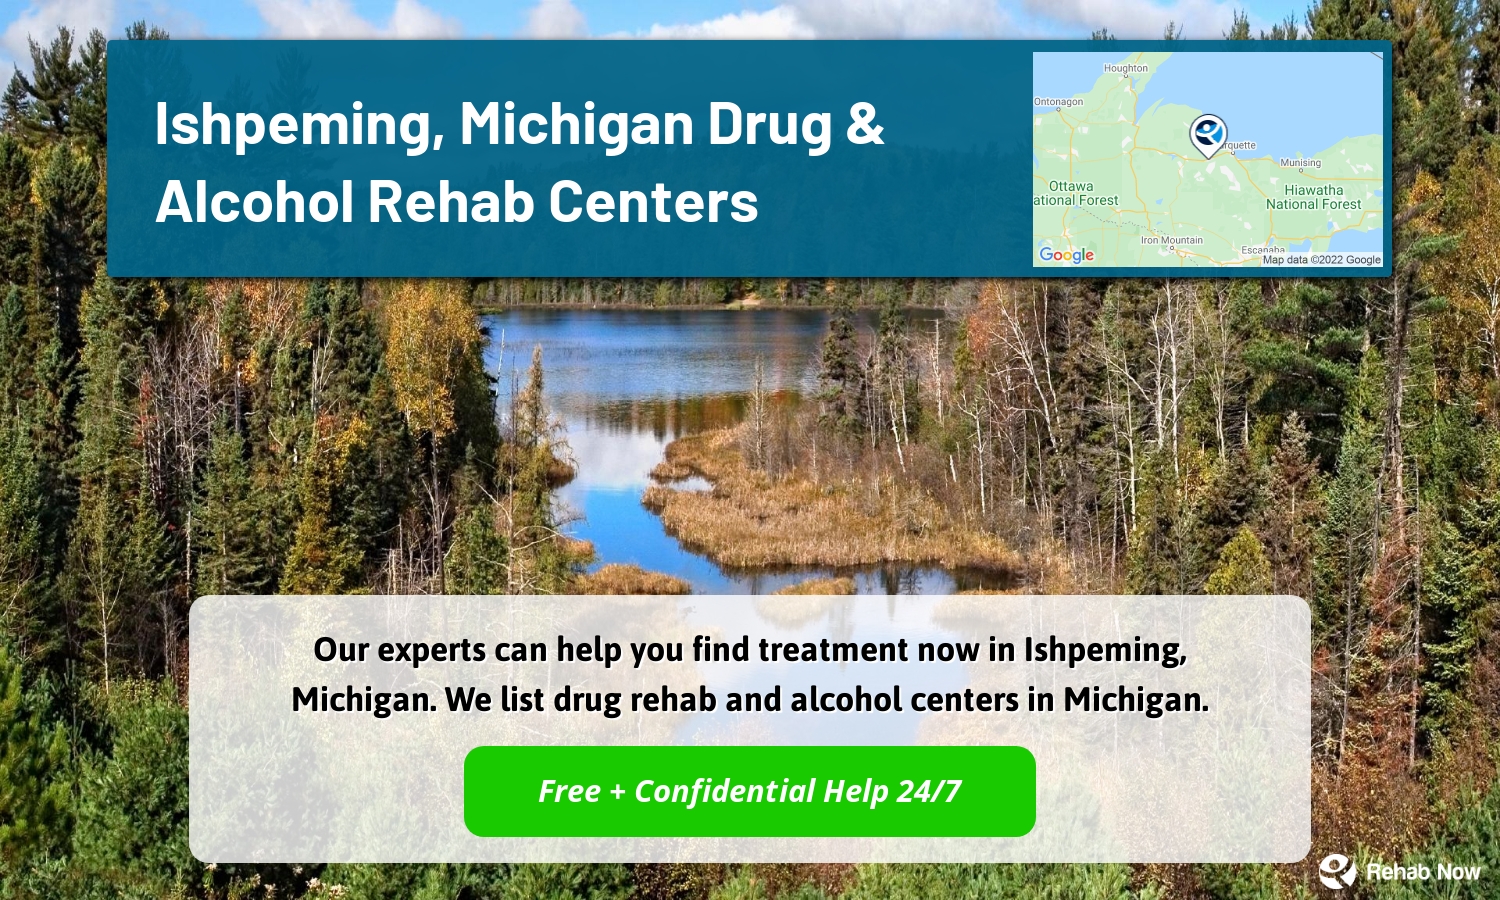 Our experts can help you find treatment now in Ishpeming, Michigan. We list drug rehab and alcohol centers in Michigan.